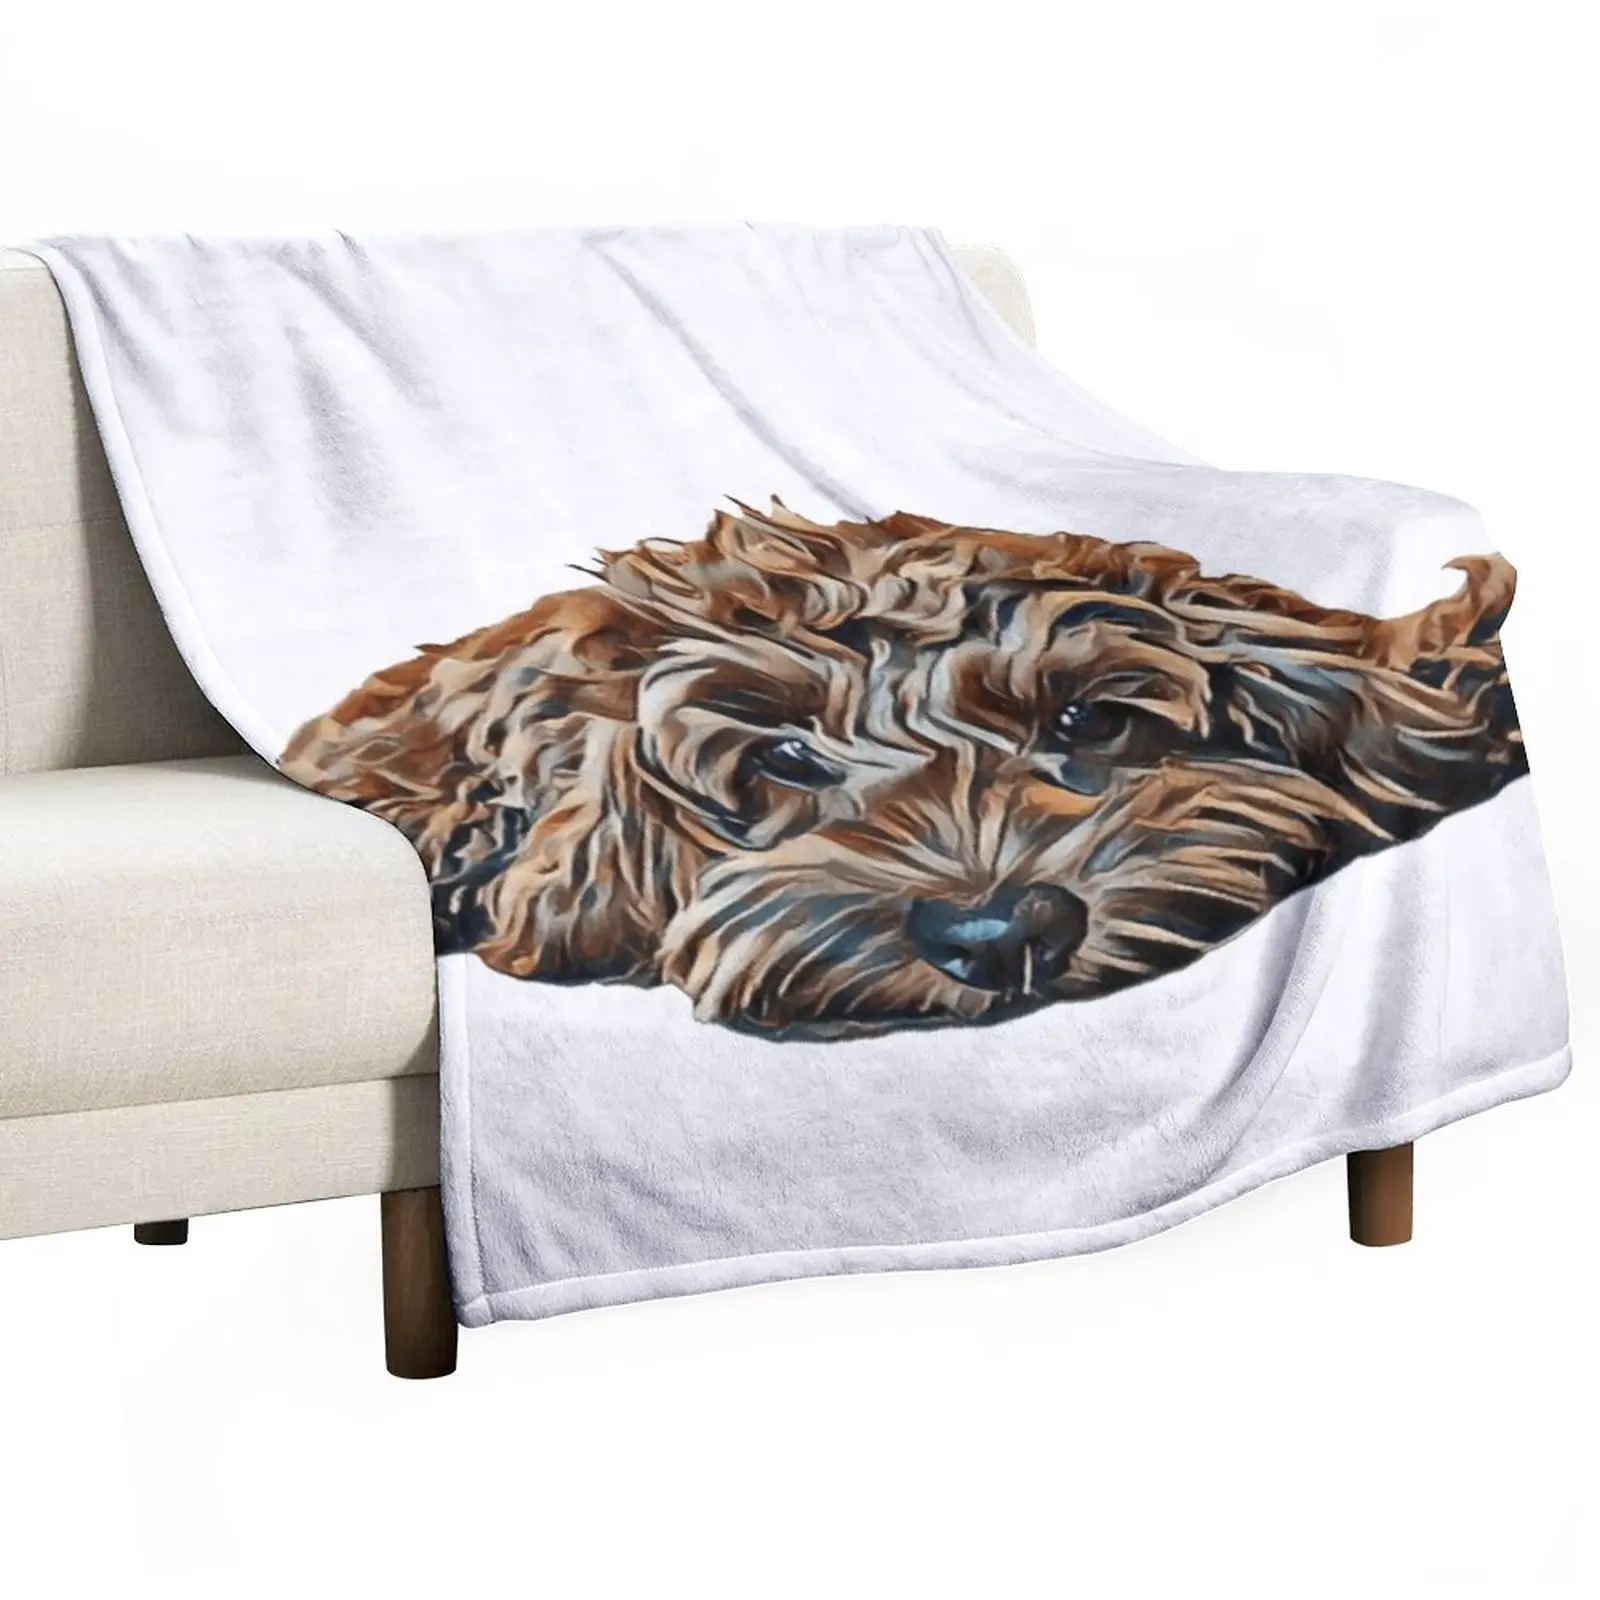 

Chocolate/Brown Cockapoo - White Background Throw Blanket Blankets Sofas Of Decoration Winter beds Hair Blankets